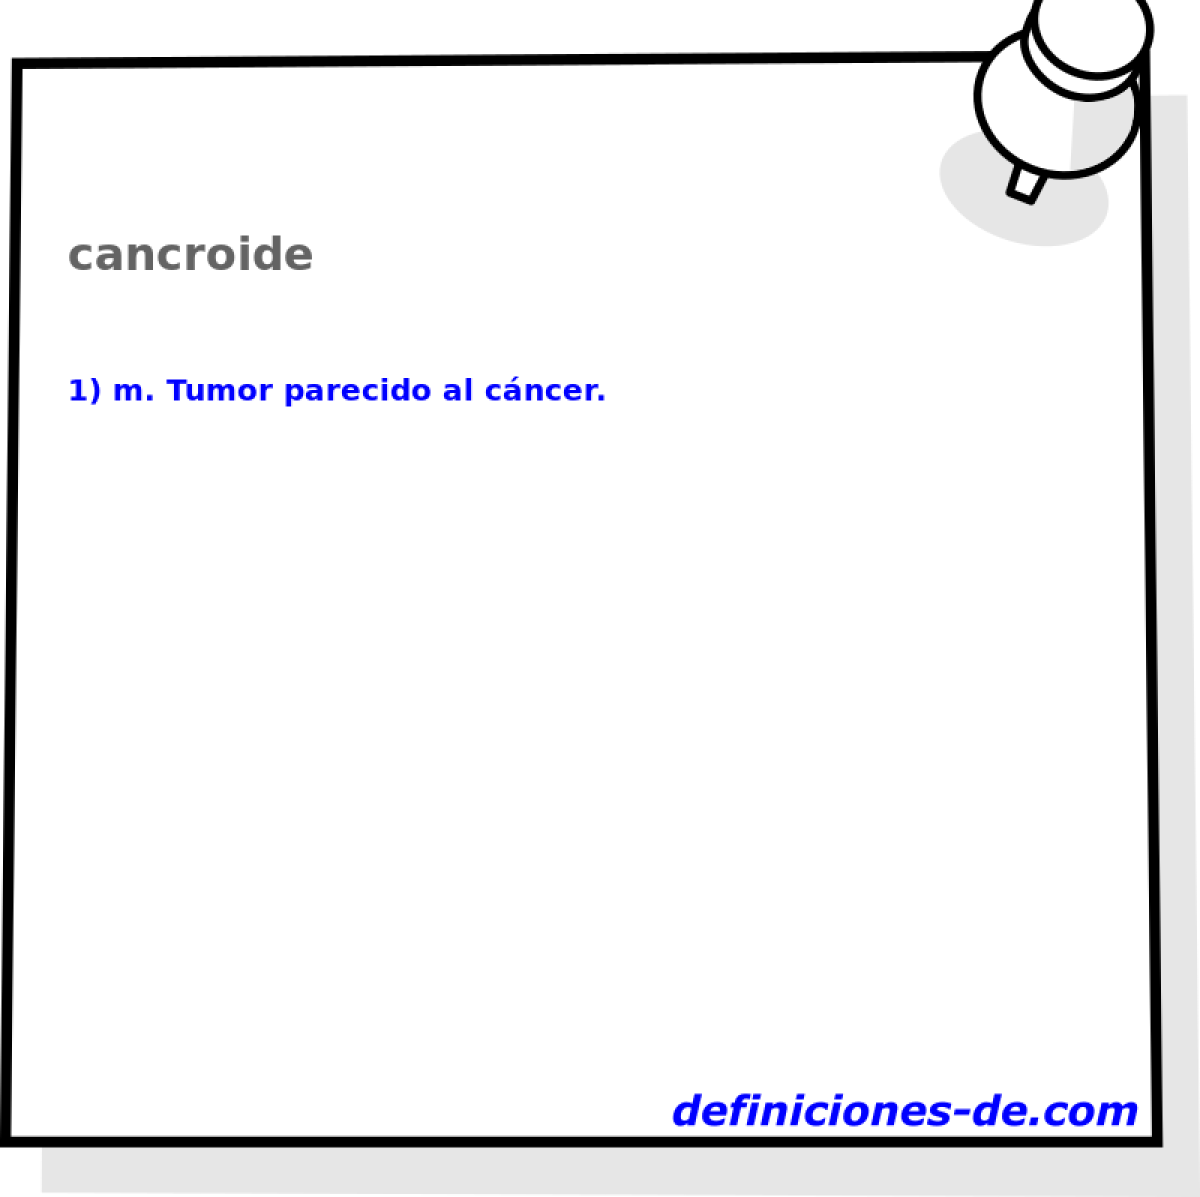 cancroide 